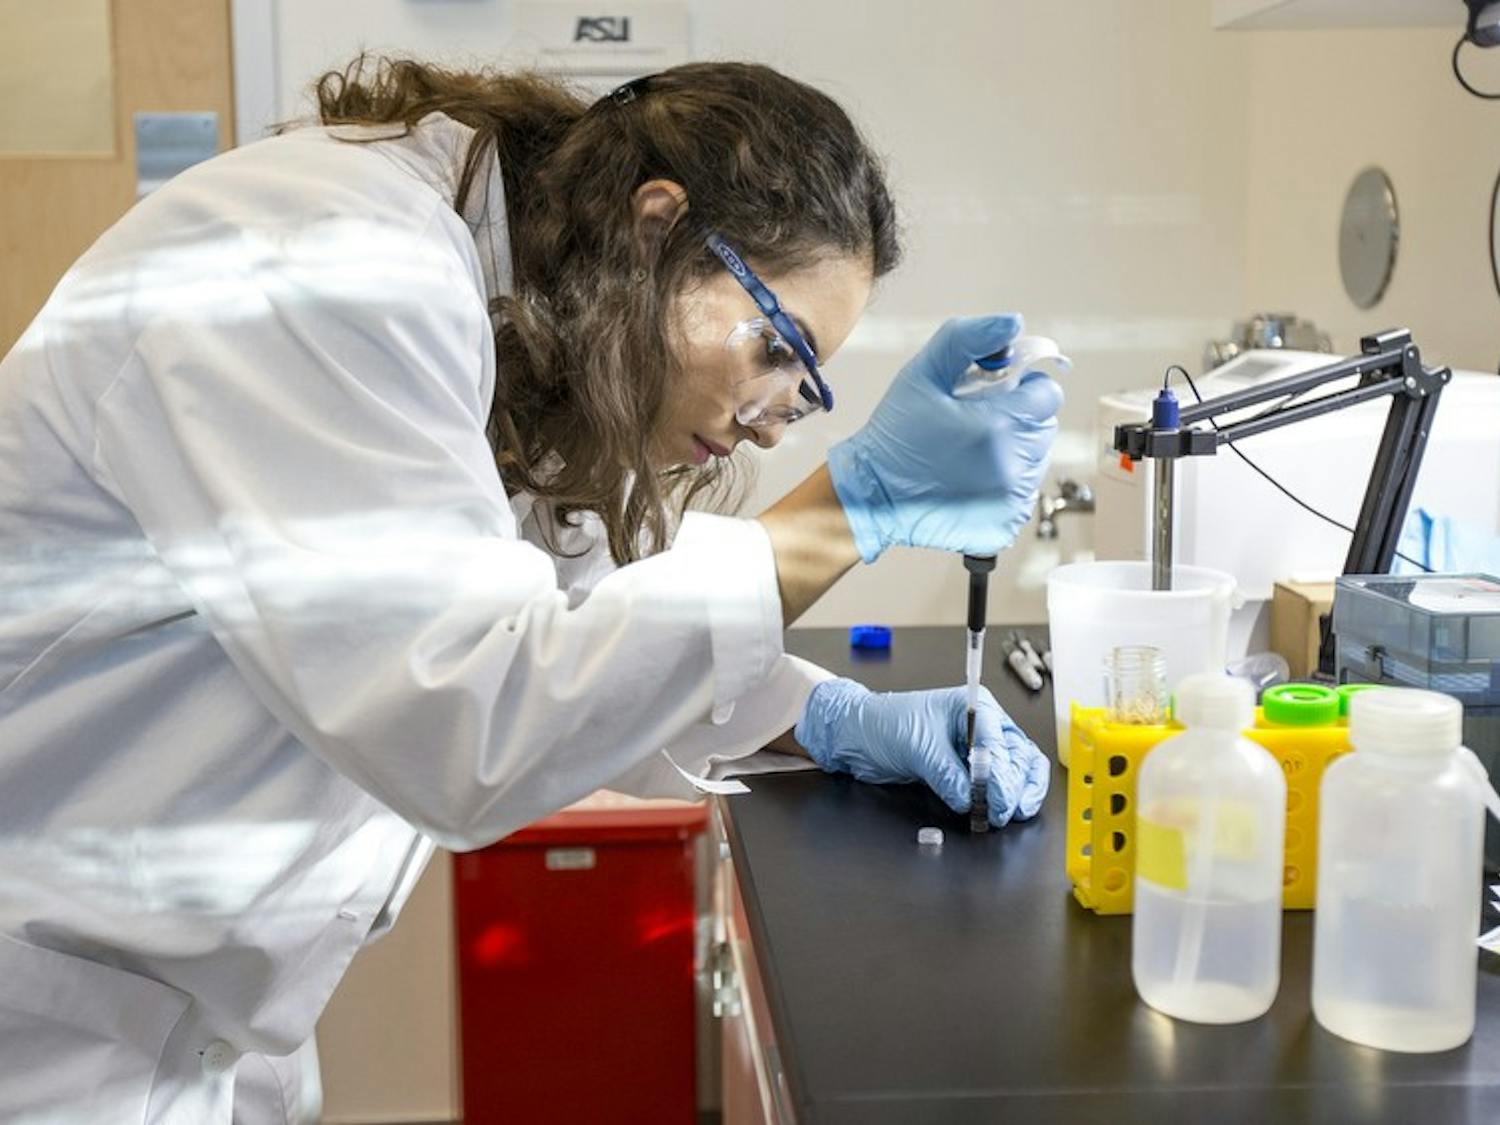 Nutrition and Dietetics major Almarie Riveria measures the PH balance of a DevilWASTE sample at the Phoenix Biomedical Campus on Thursday, Oct. 8, 2015. ASU researchers started the DevilWASTE program to analyze the nutritional habits of students over the course of their freshman year.